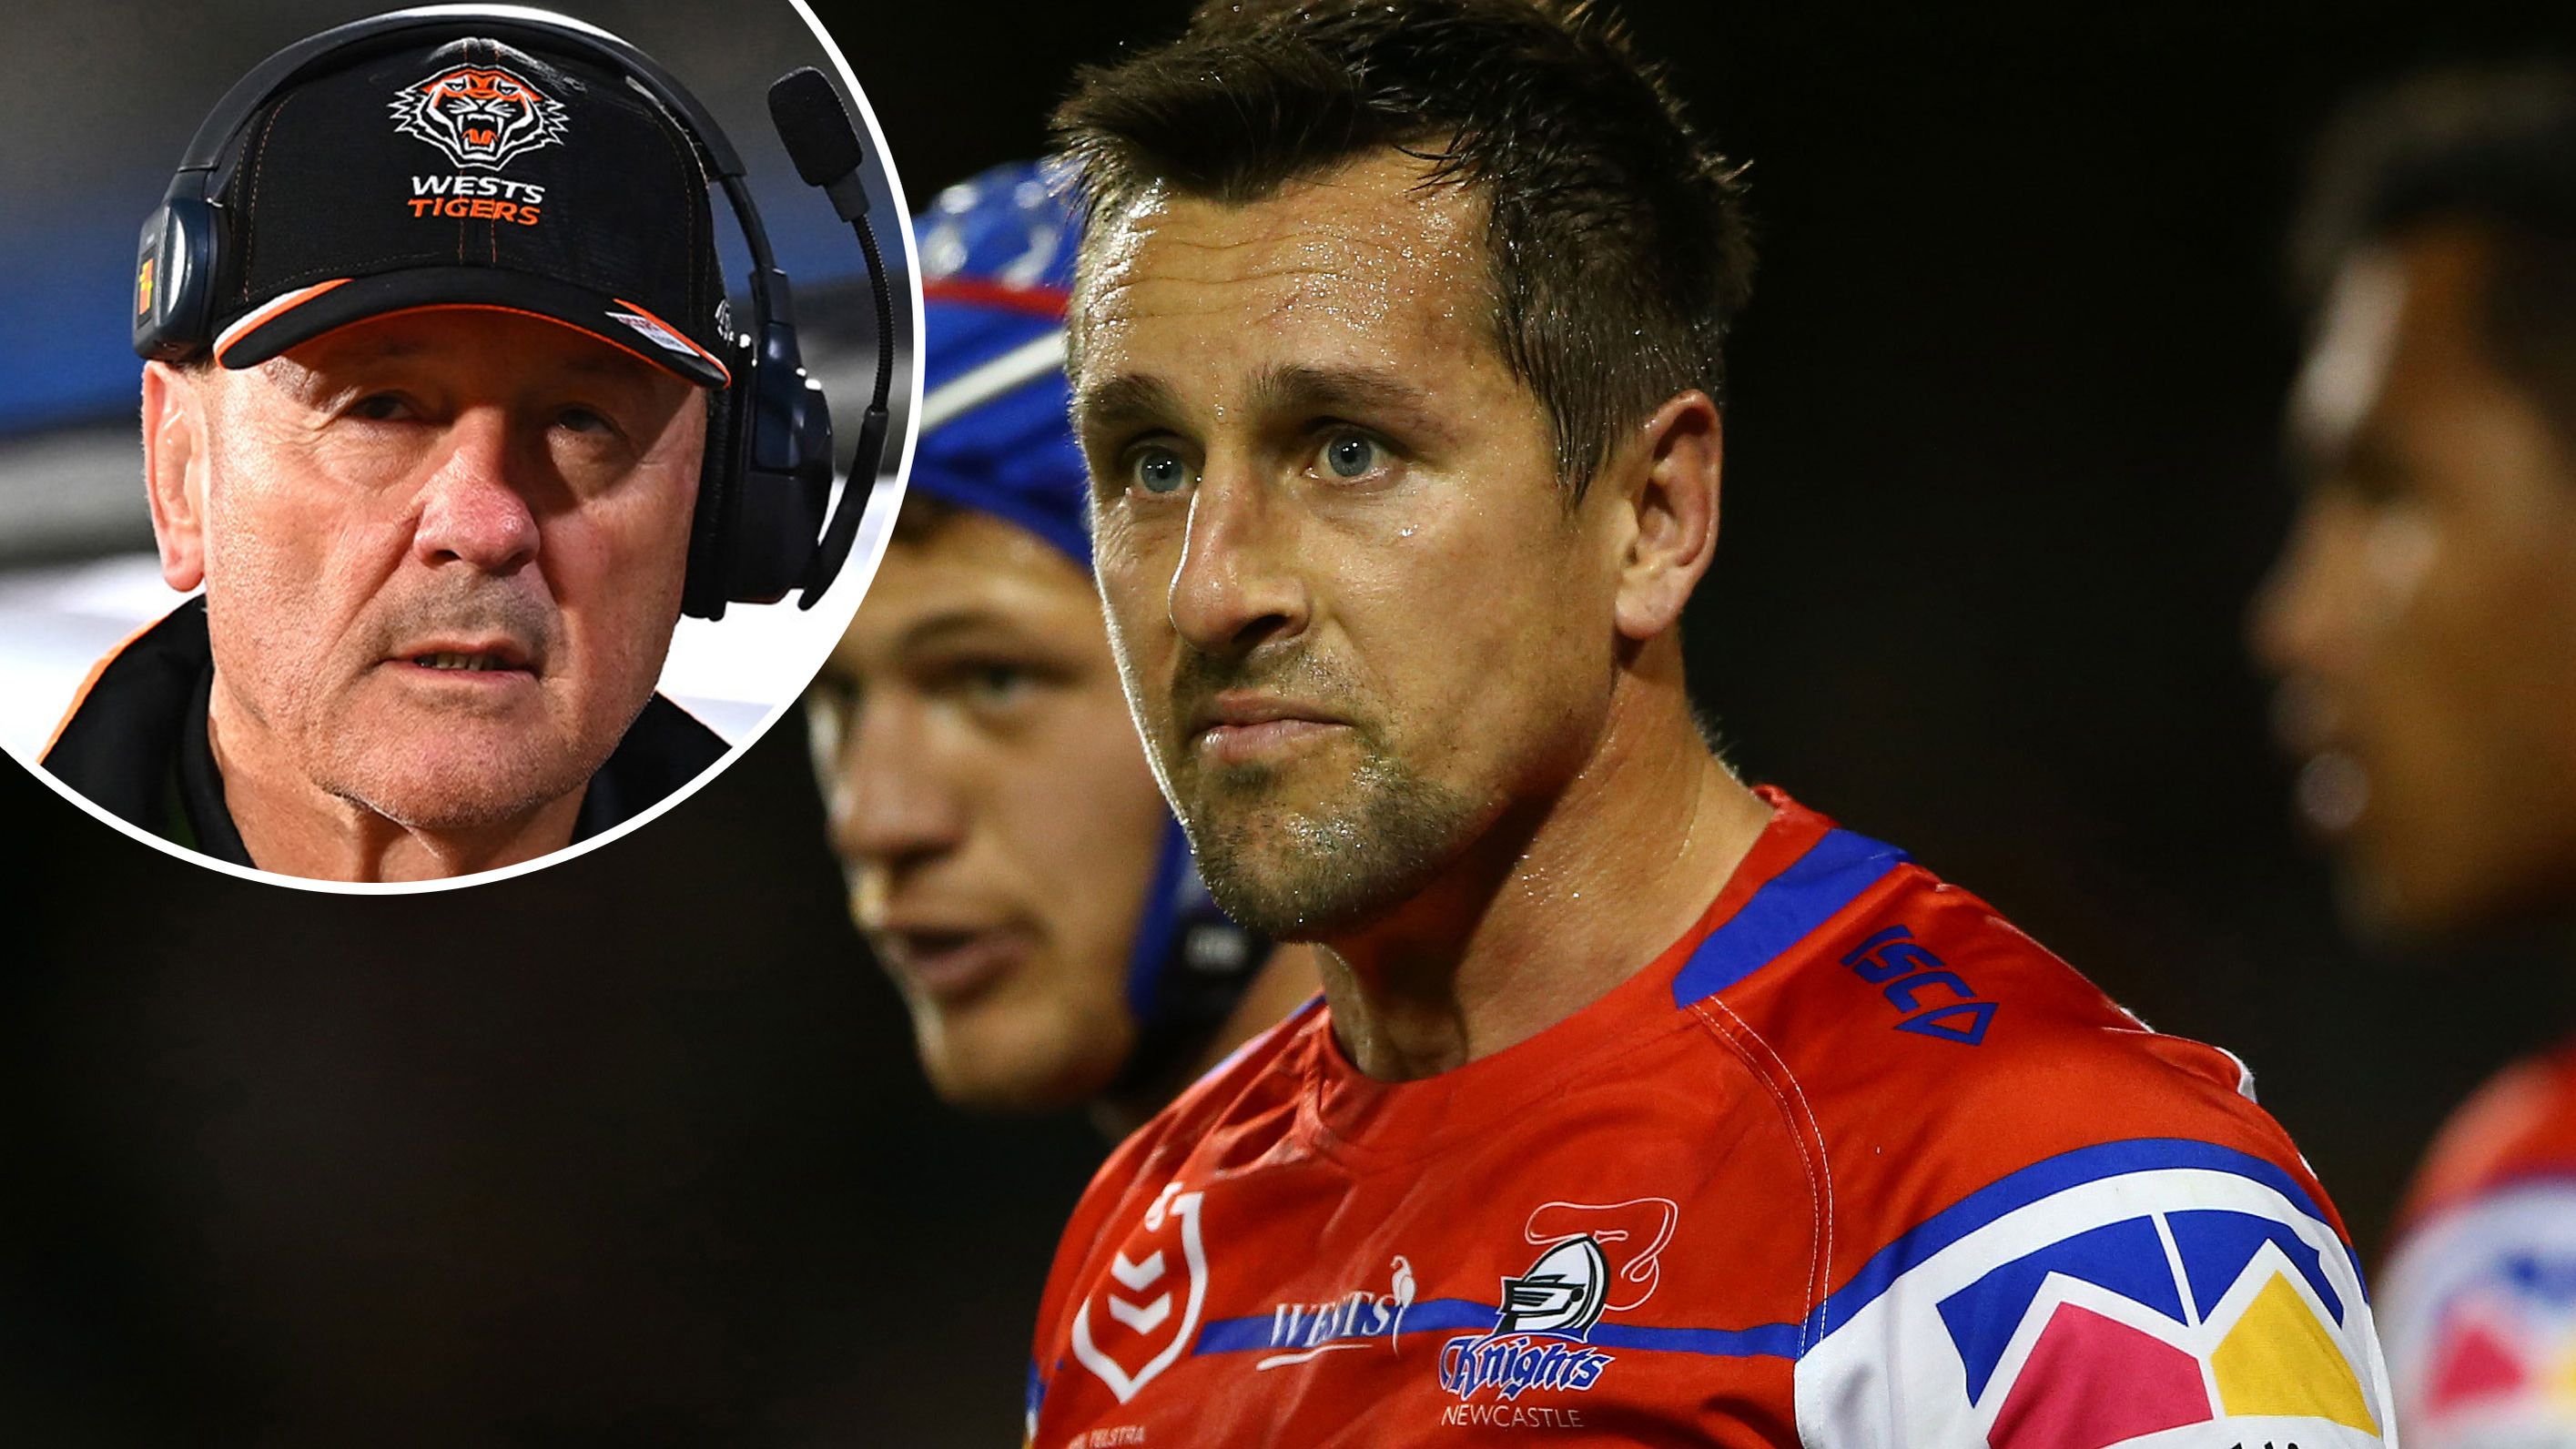 Tigers coach Tim Sheens confirms Mitchell Pearce approach, denies Luke Brooks being replaced